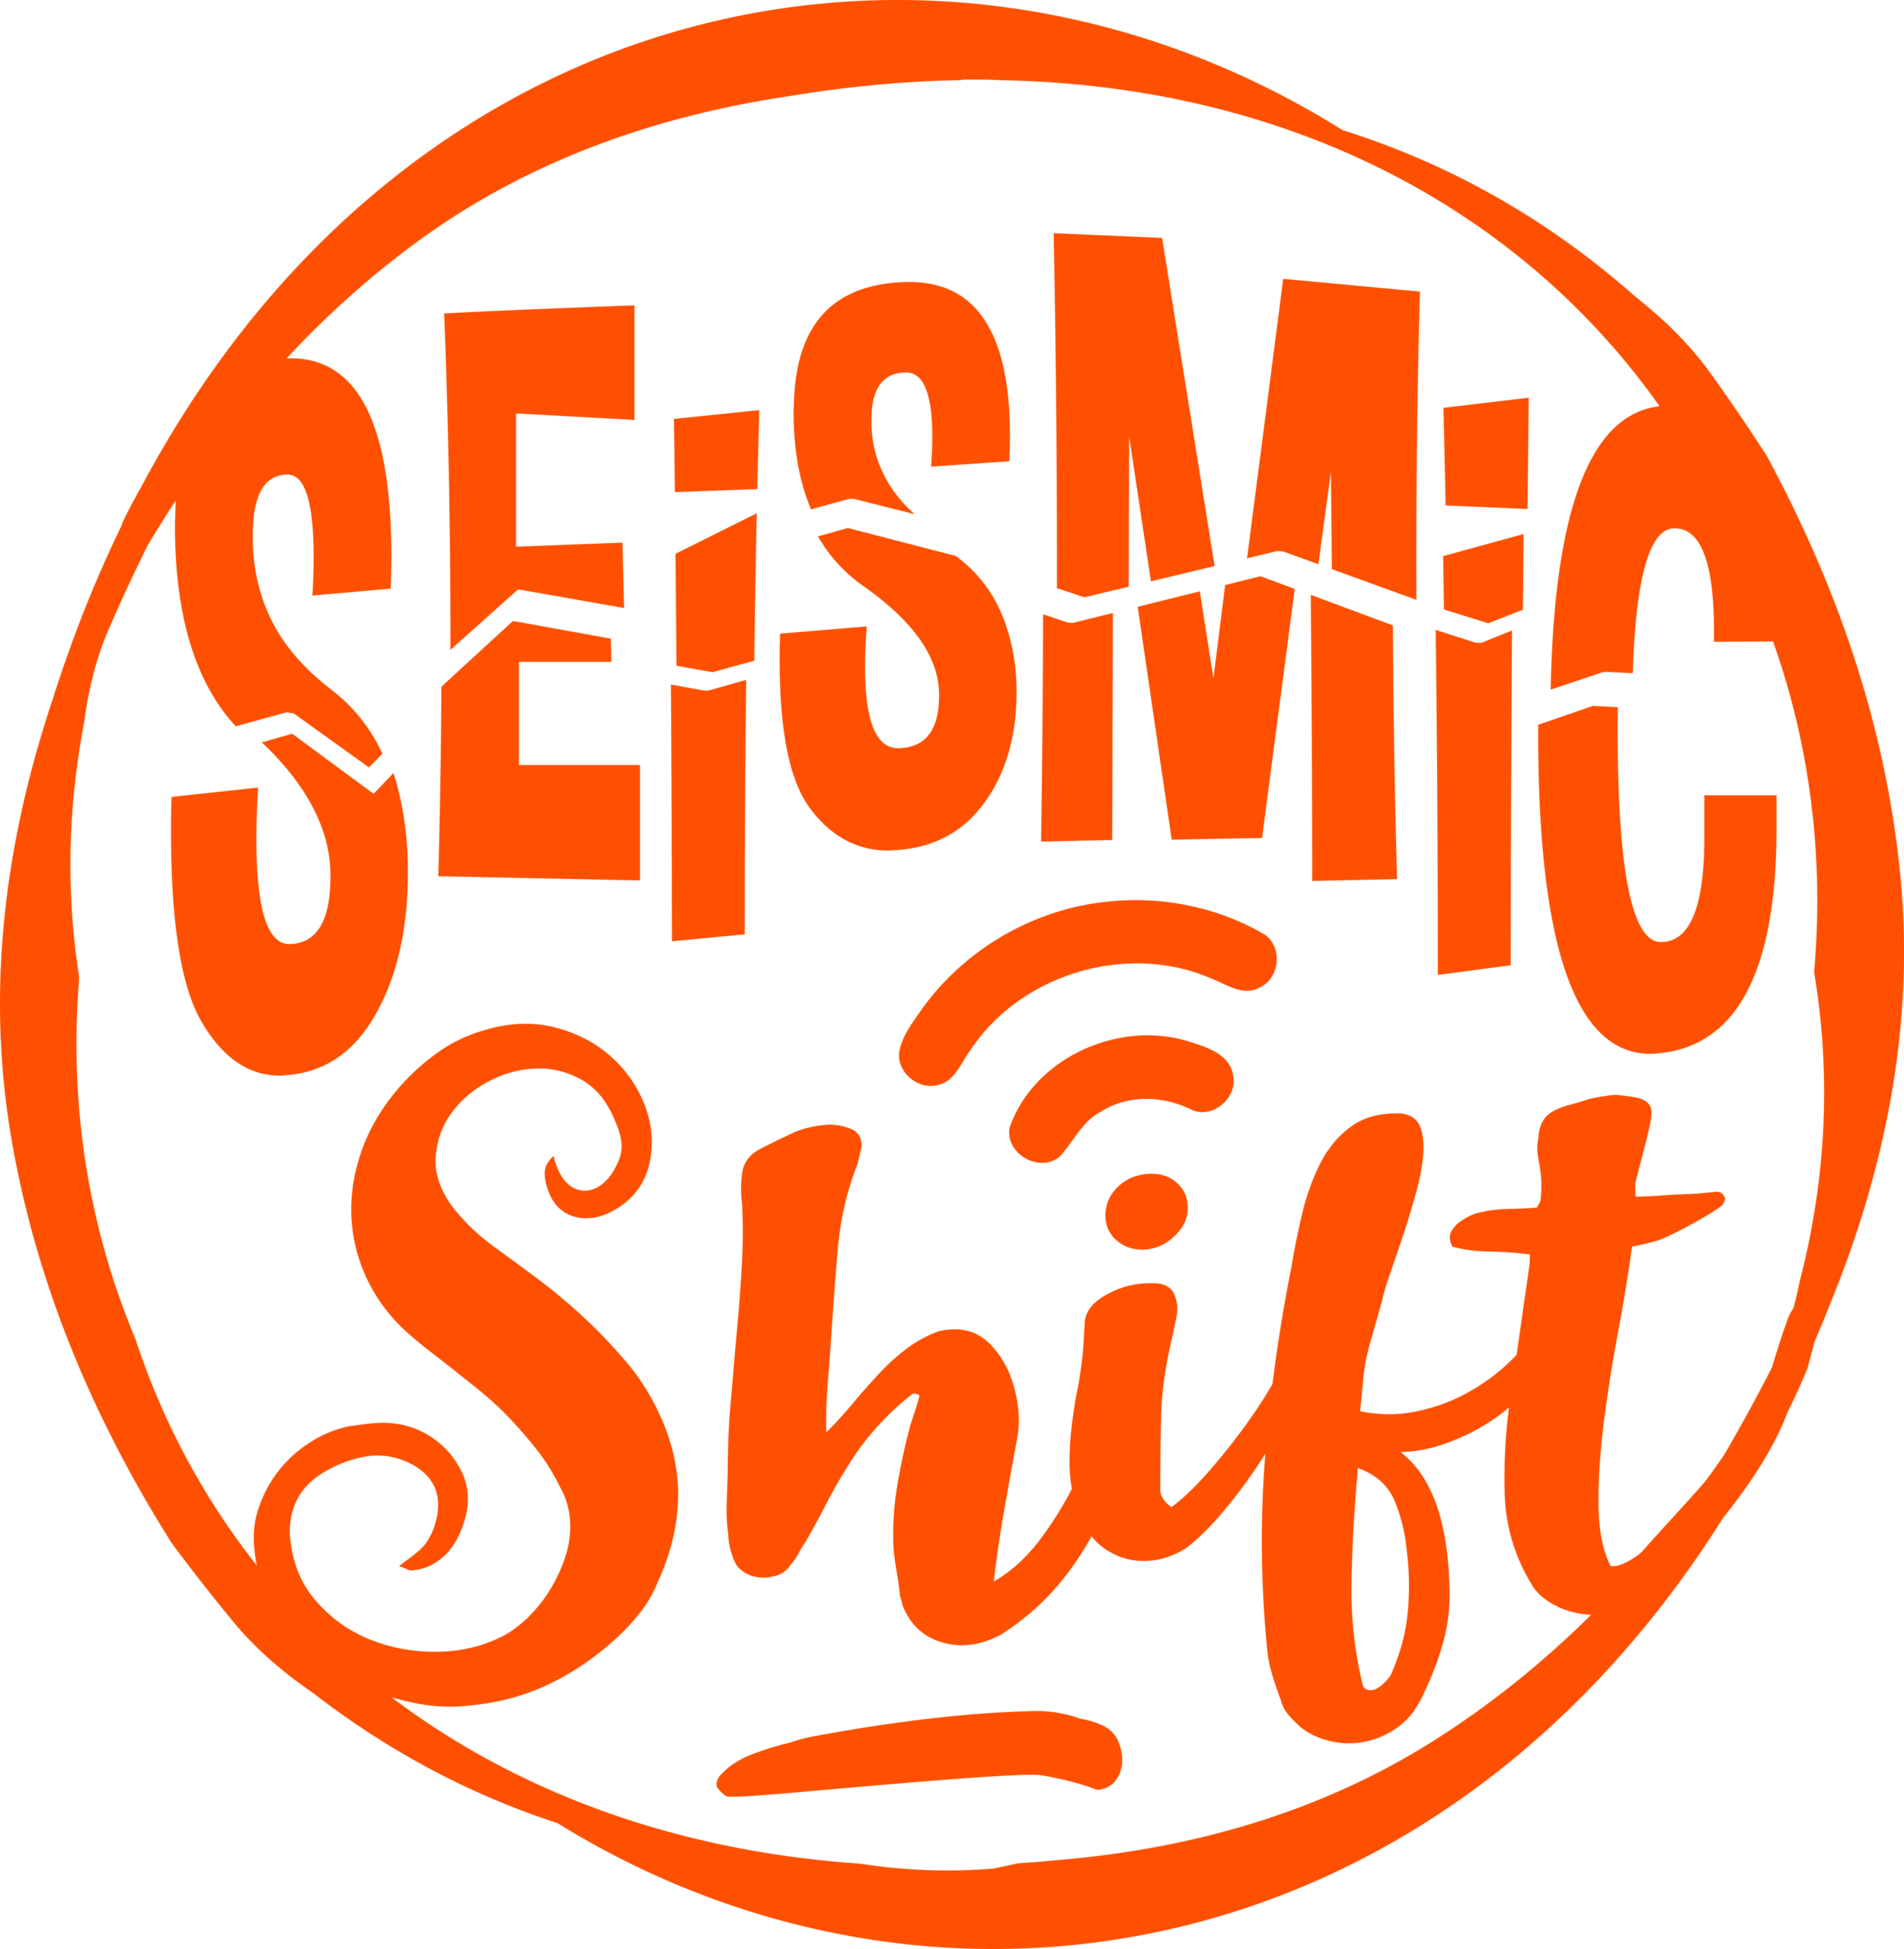 on the Seismic Shift podcast